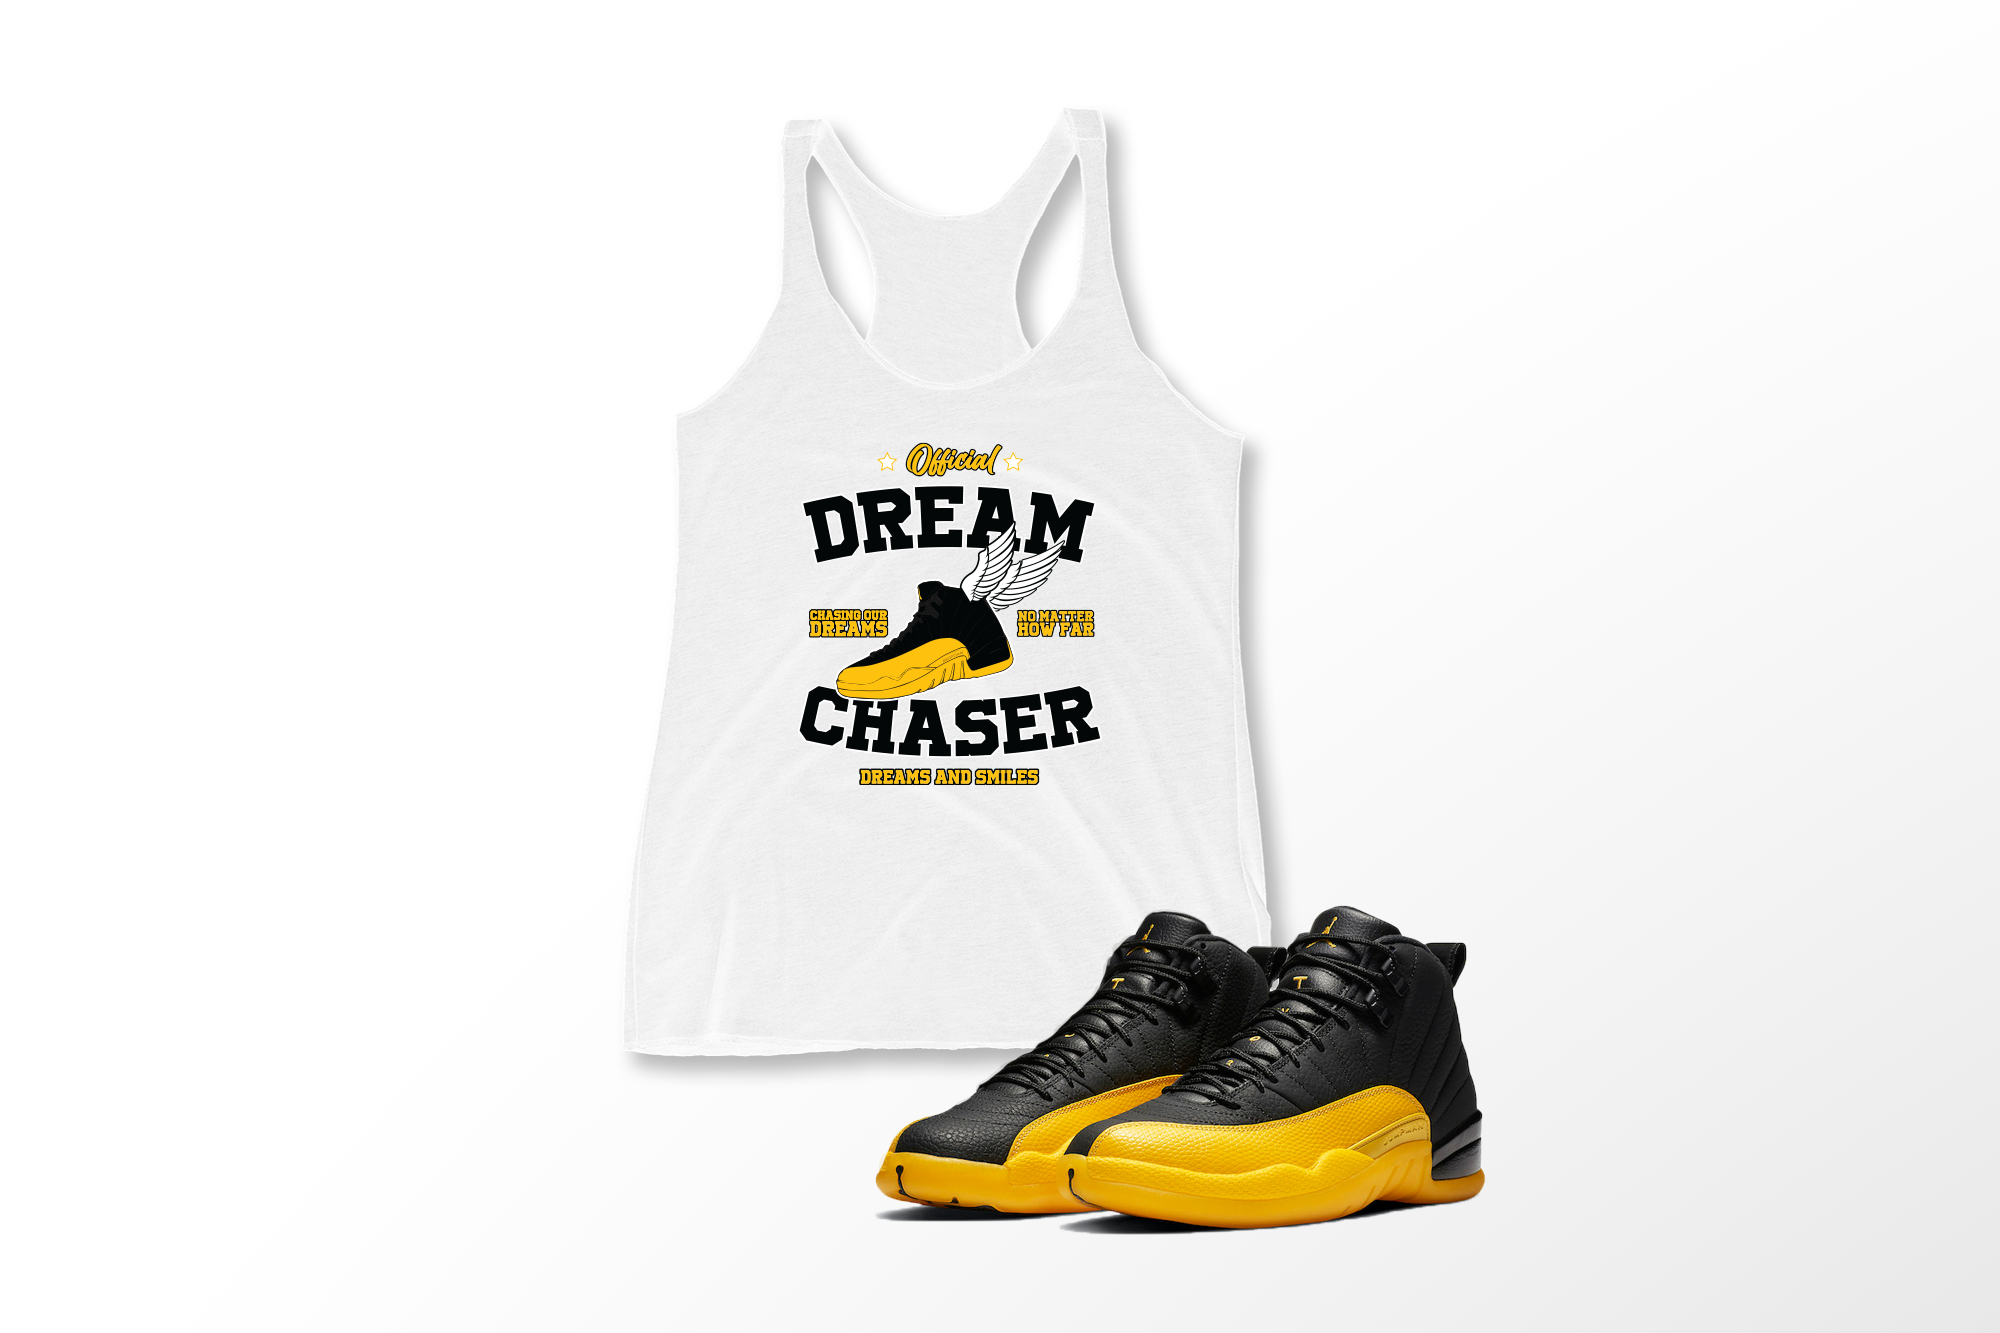 'Official Dream Chaser' in University Gold CW Women's Racerback Tank